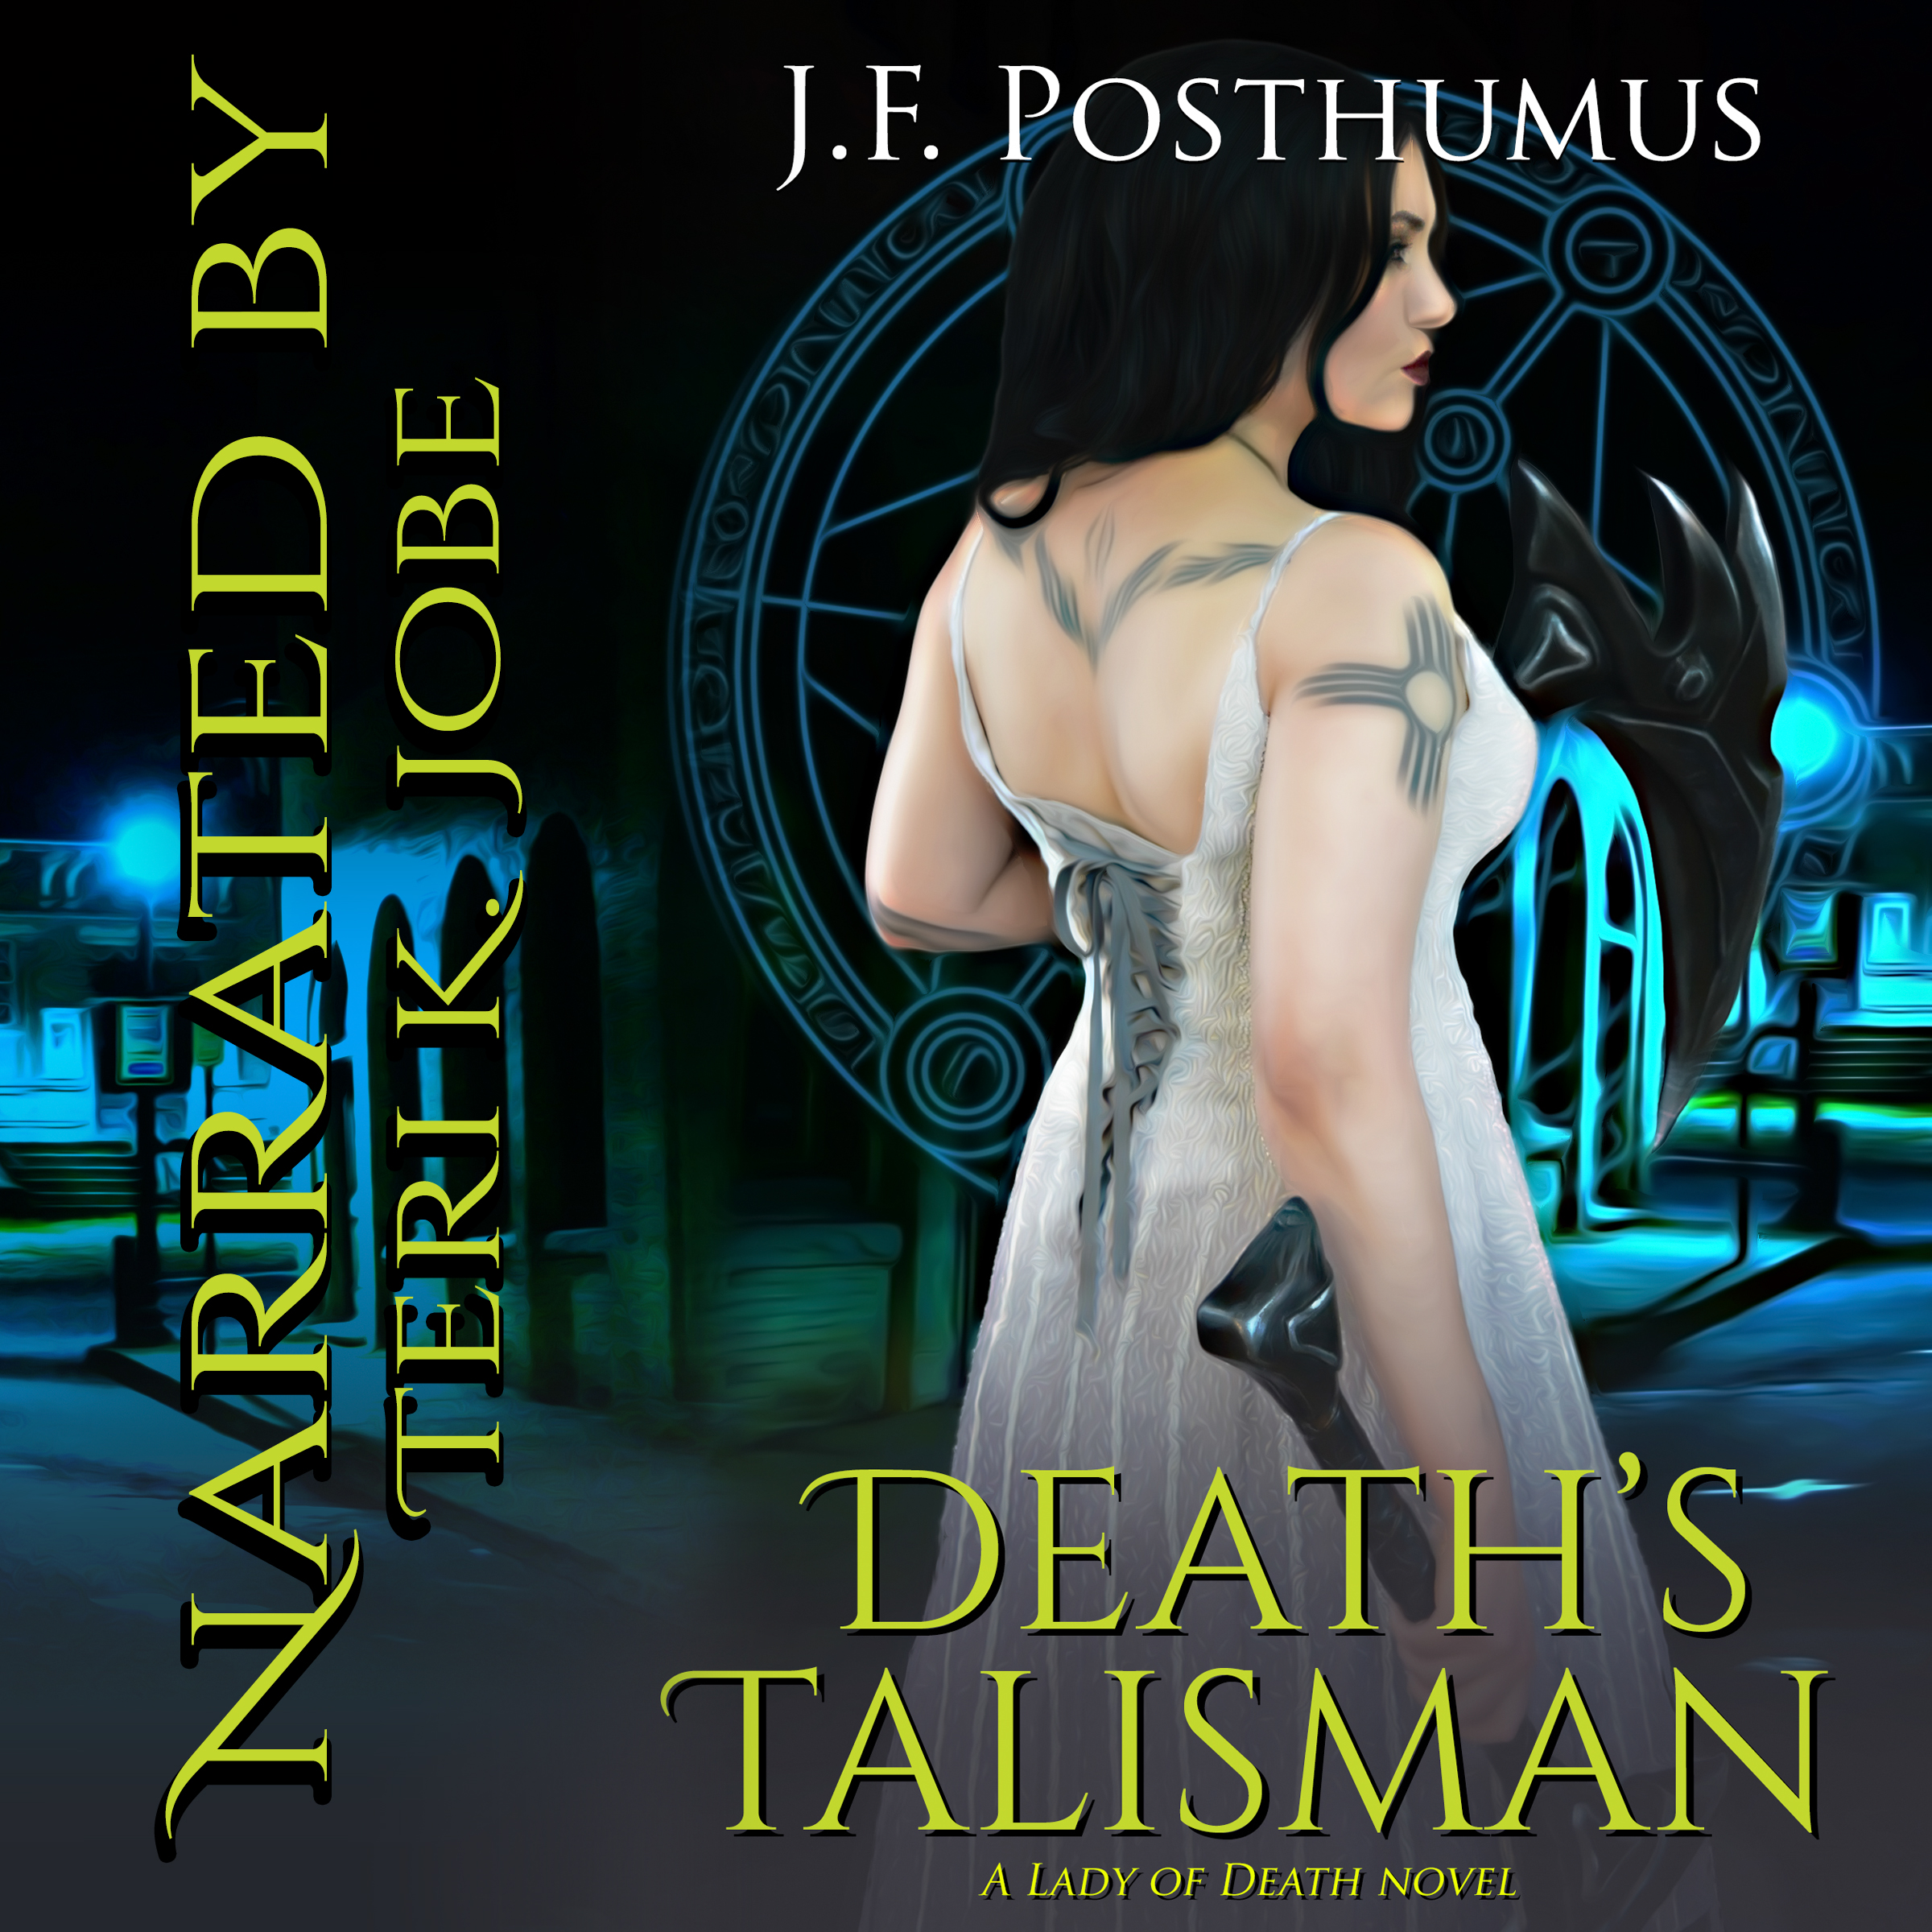 Need another audio read to fill your time? Death’s Talisman by J.F. Posthumus, narrated by Teri K. Jobe is out now on Audible.